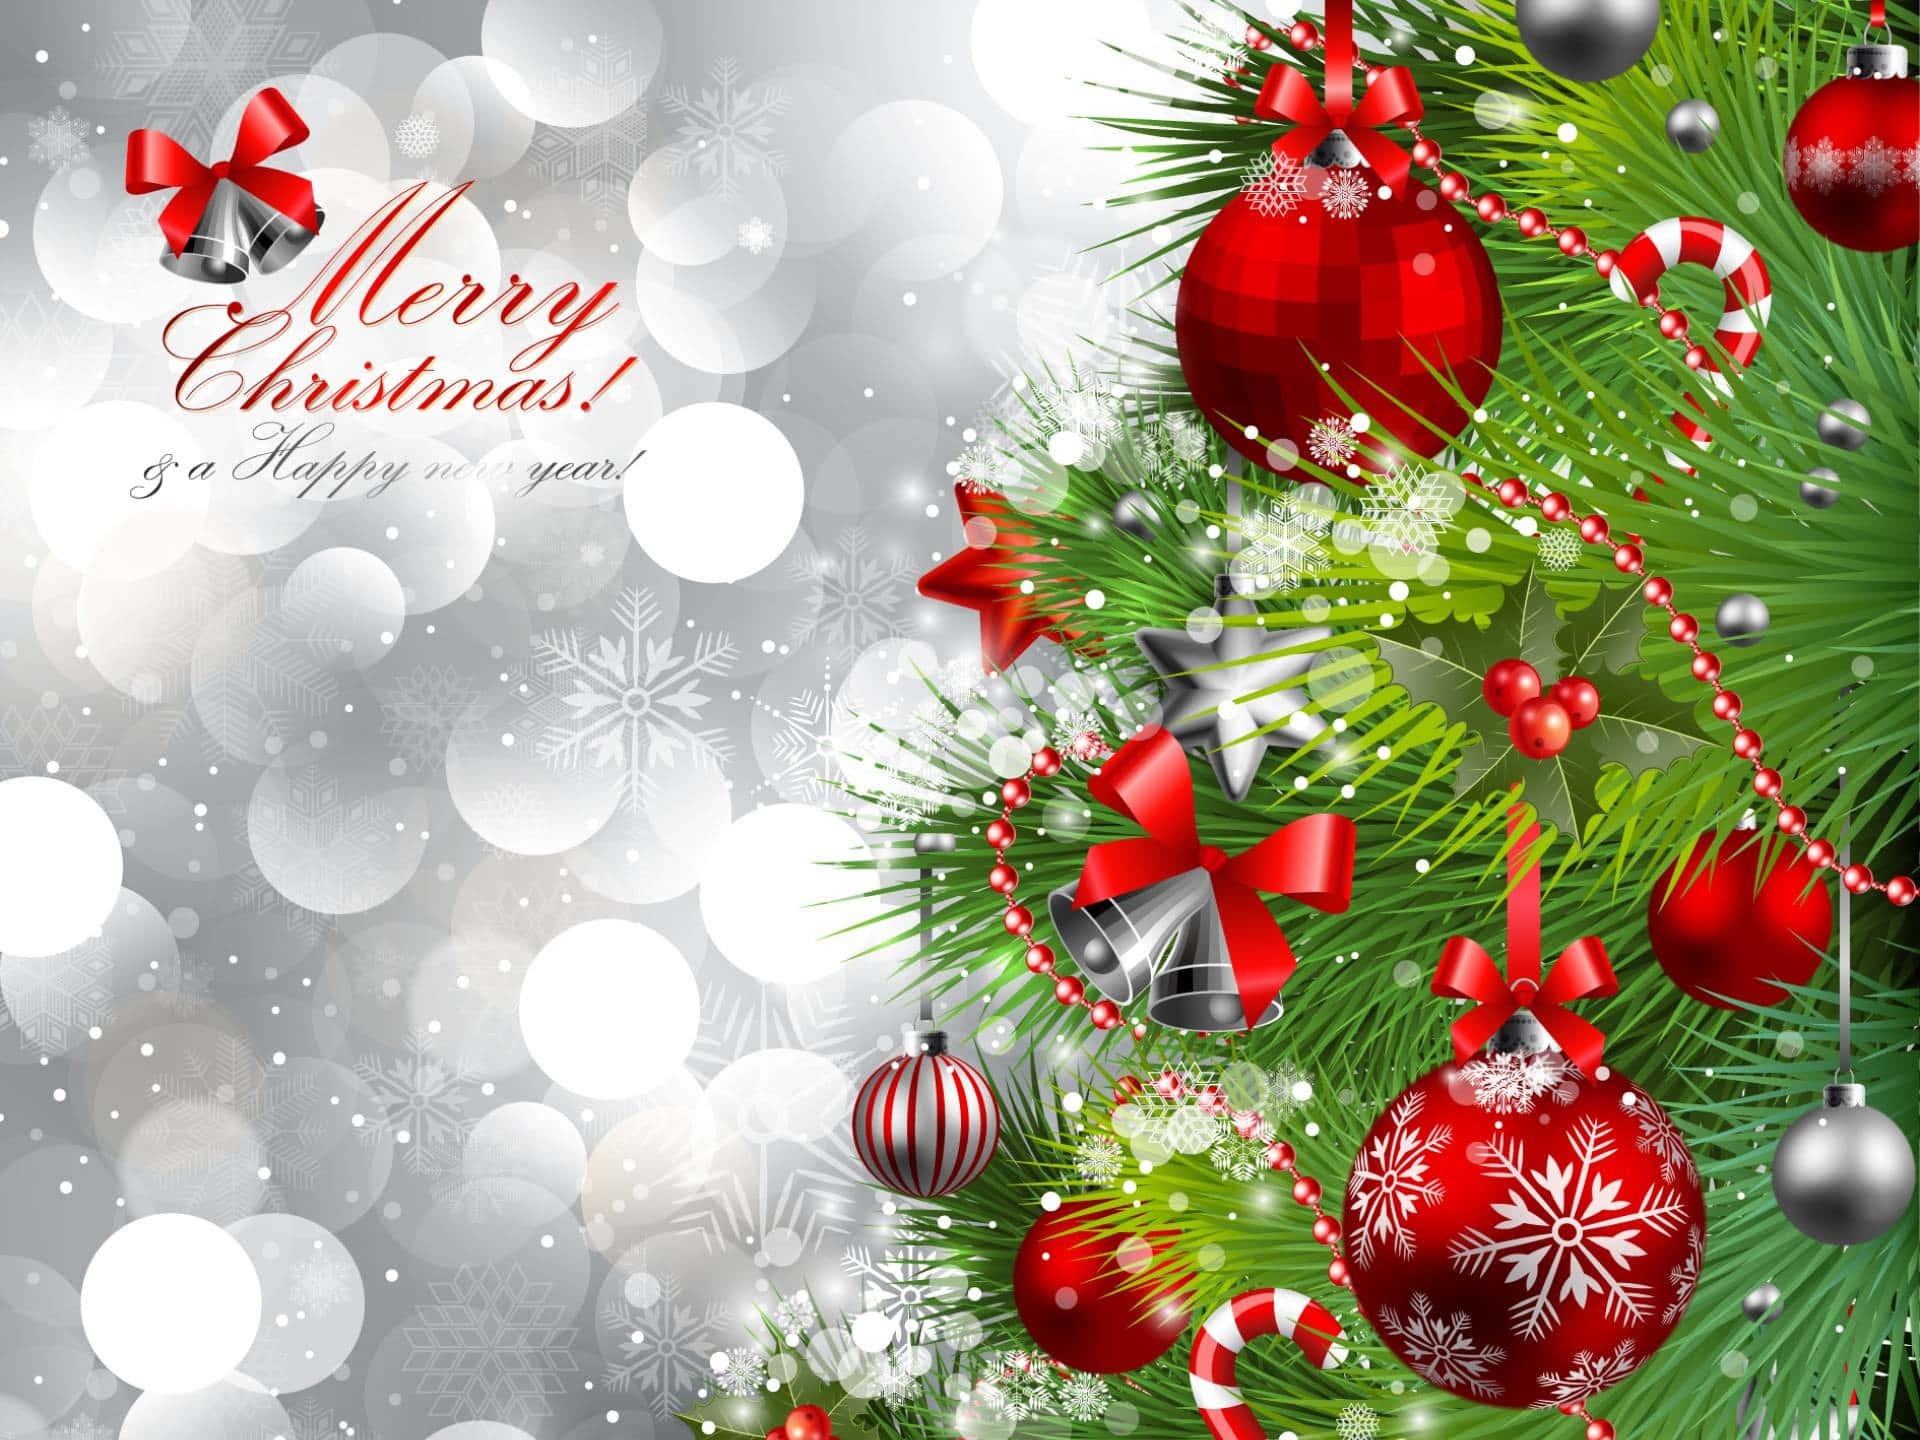 A festive Christmas tree decorated with decorations in high resolution creating a beautiful holiday backdrop.